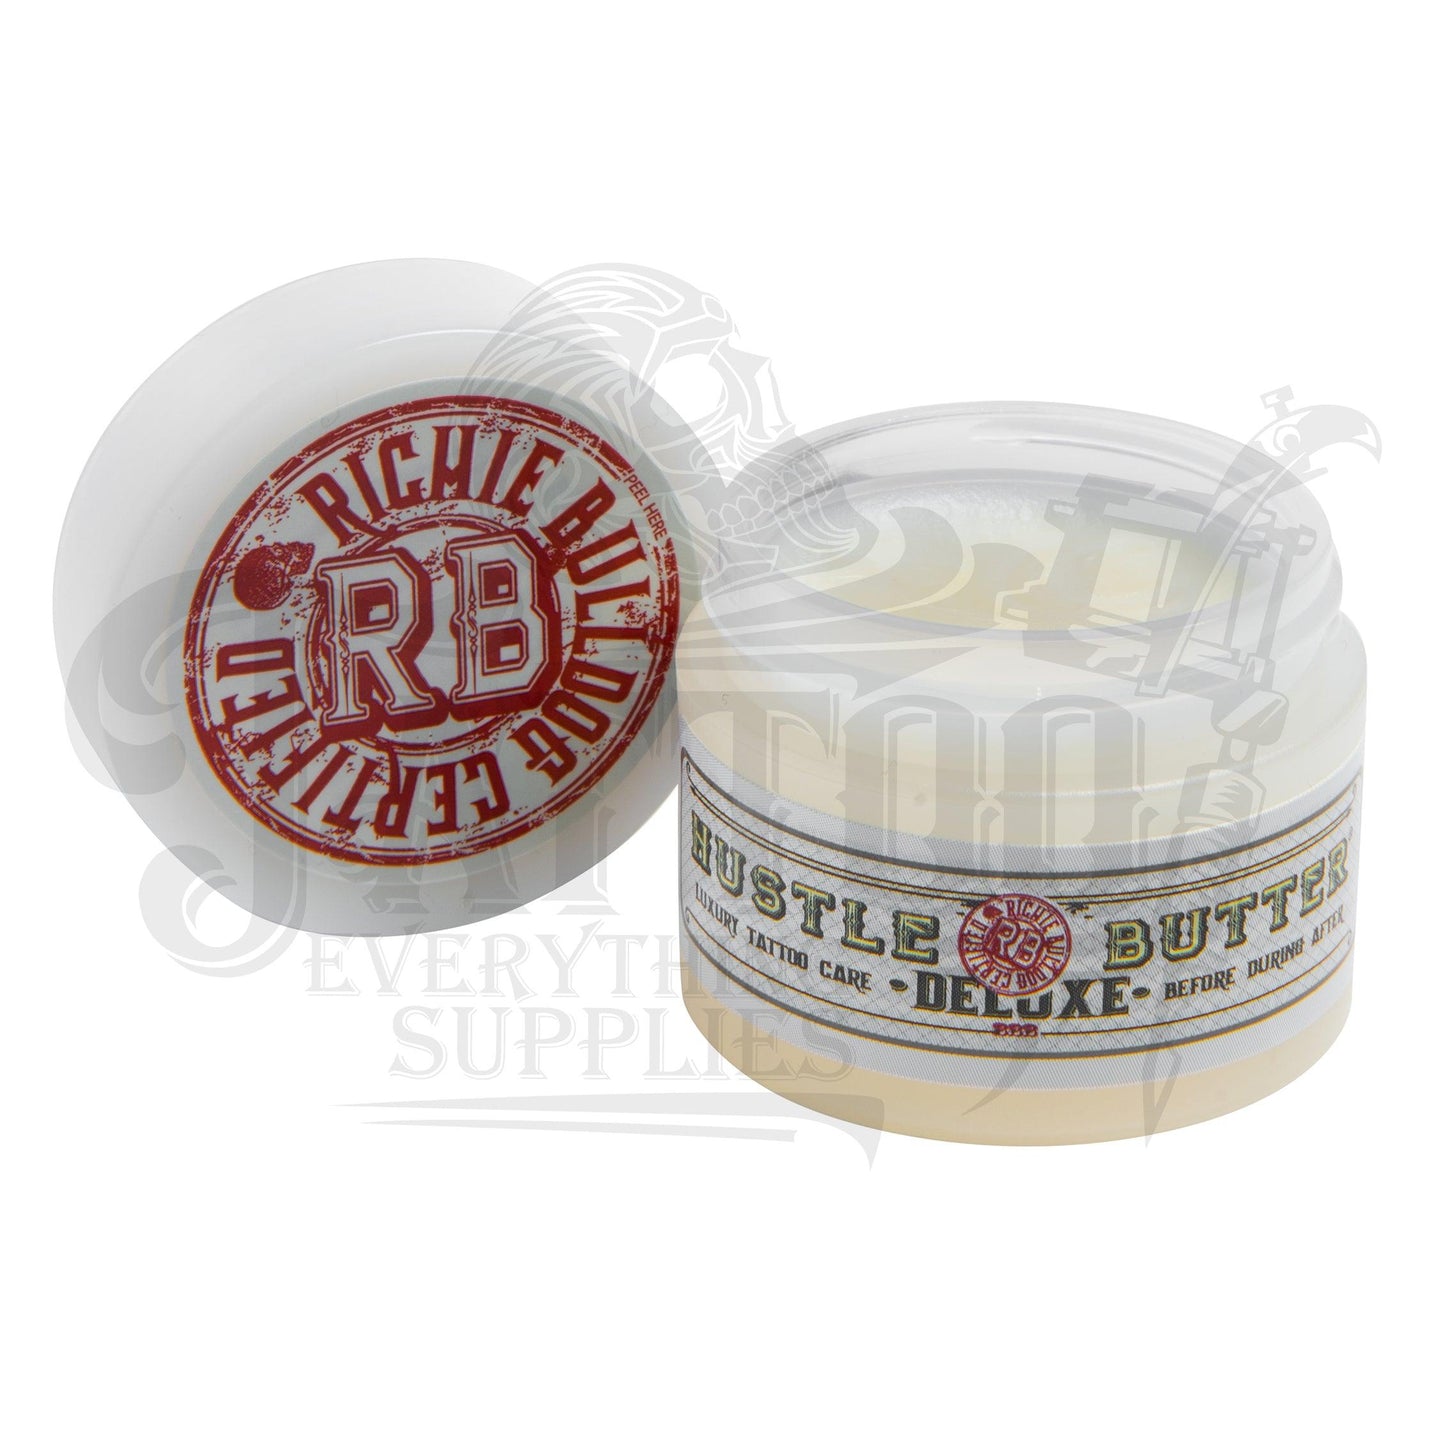 Hustle Butter Deluxe® Tub "The Ones" Organic Tattoo Care 30ml (1oz) - Tattoo Everything Supplies